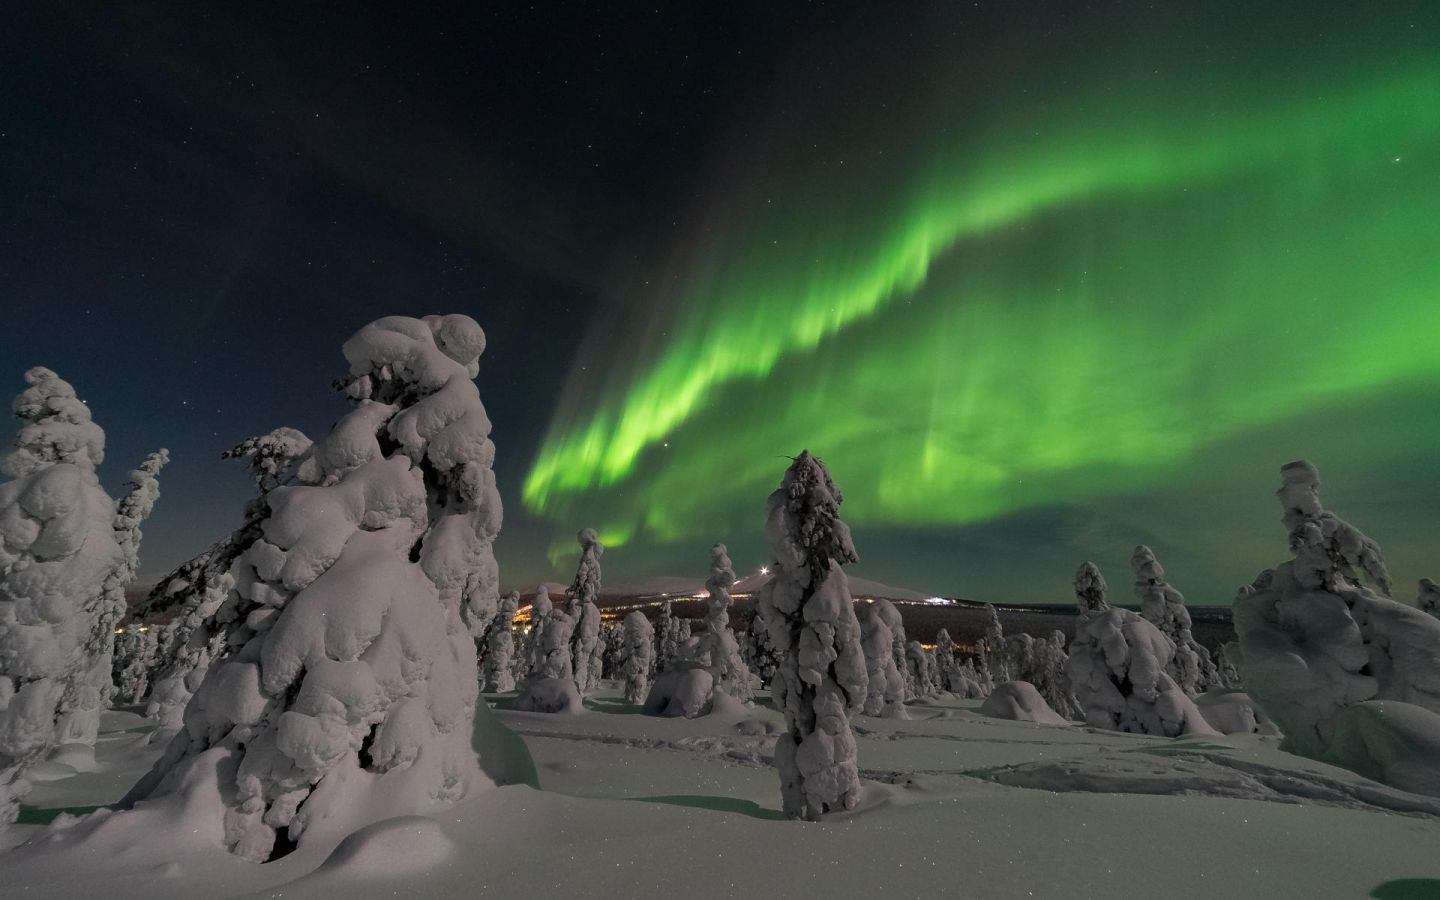 Northern Lights over snow crowned trees in Finnish Lapland in winter